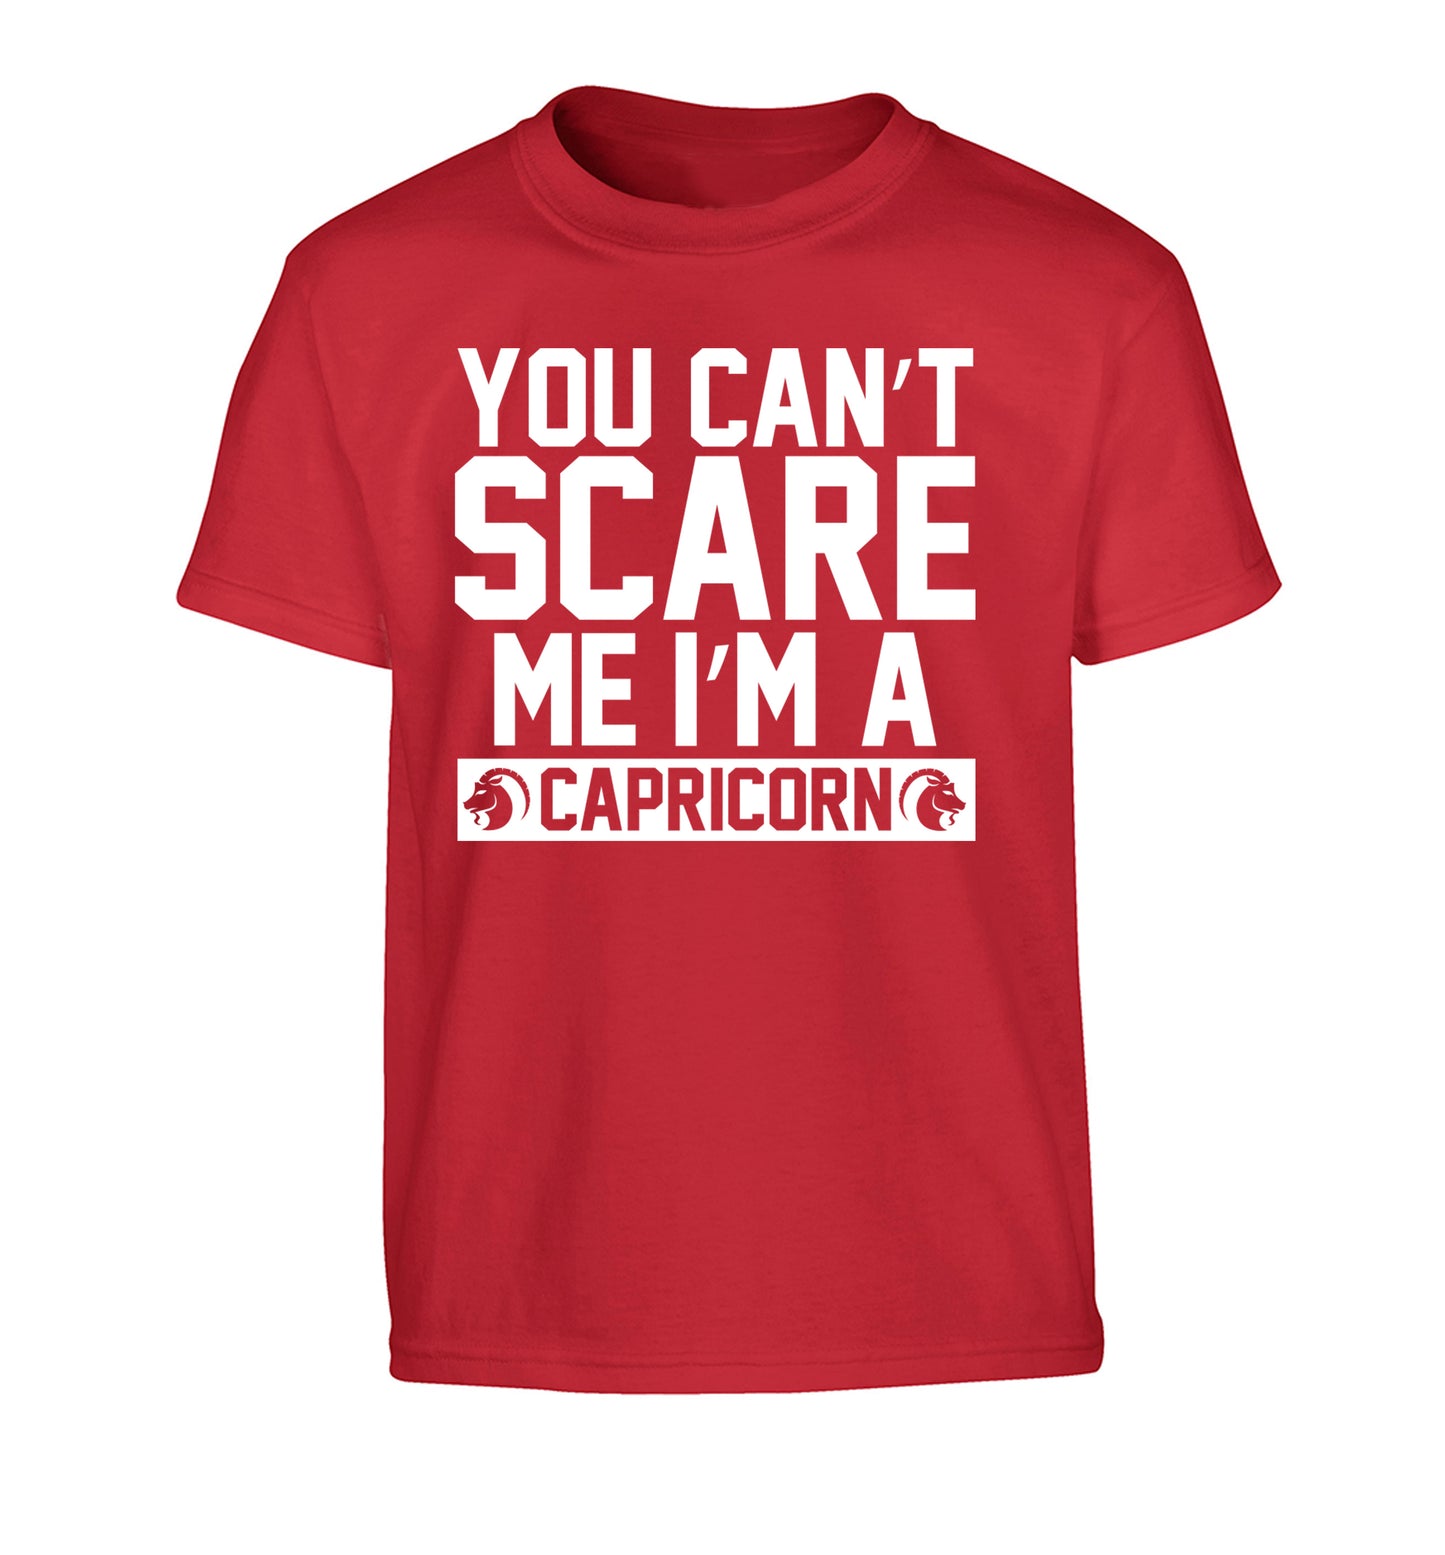 You can't scare me I'm a capricorn Children's red Tshirt 12-13 Years